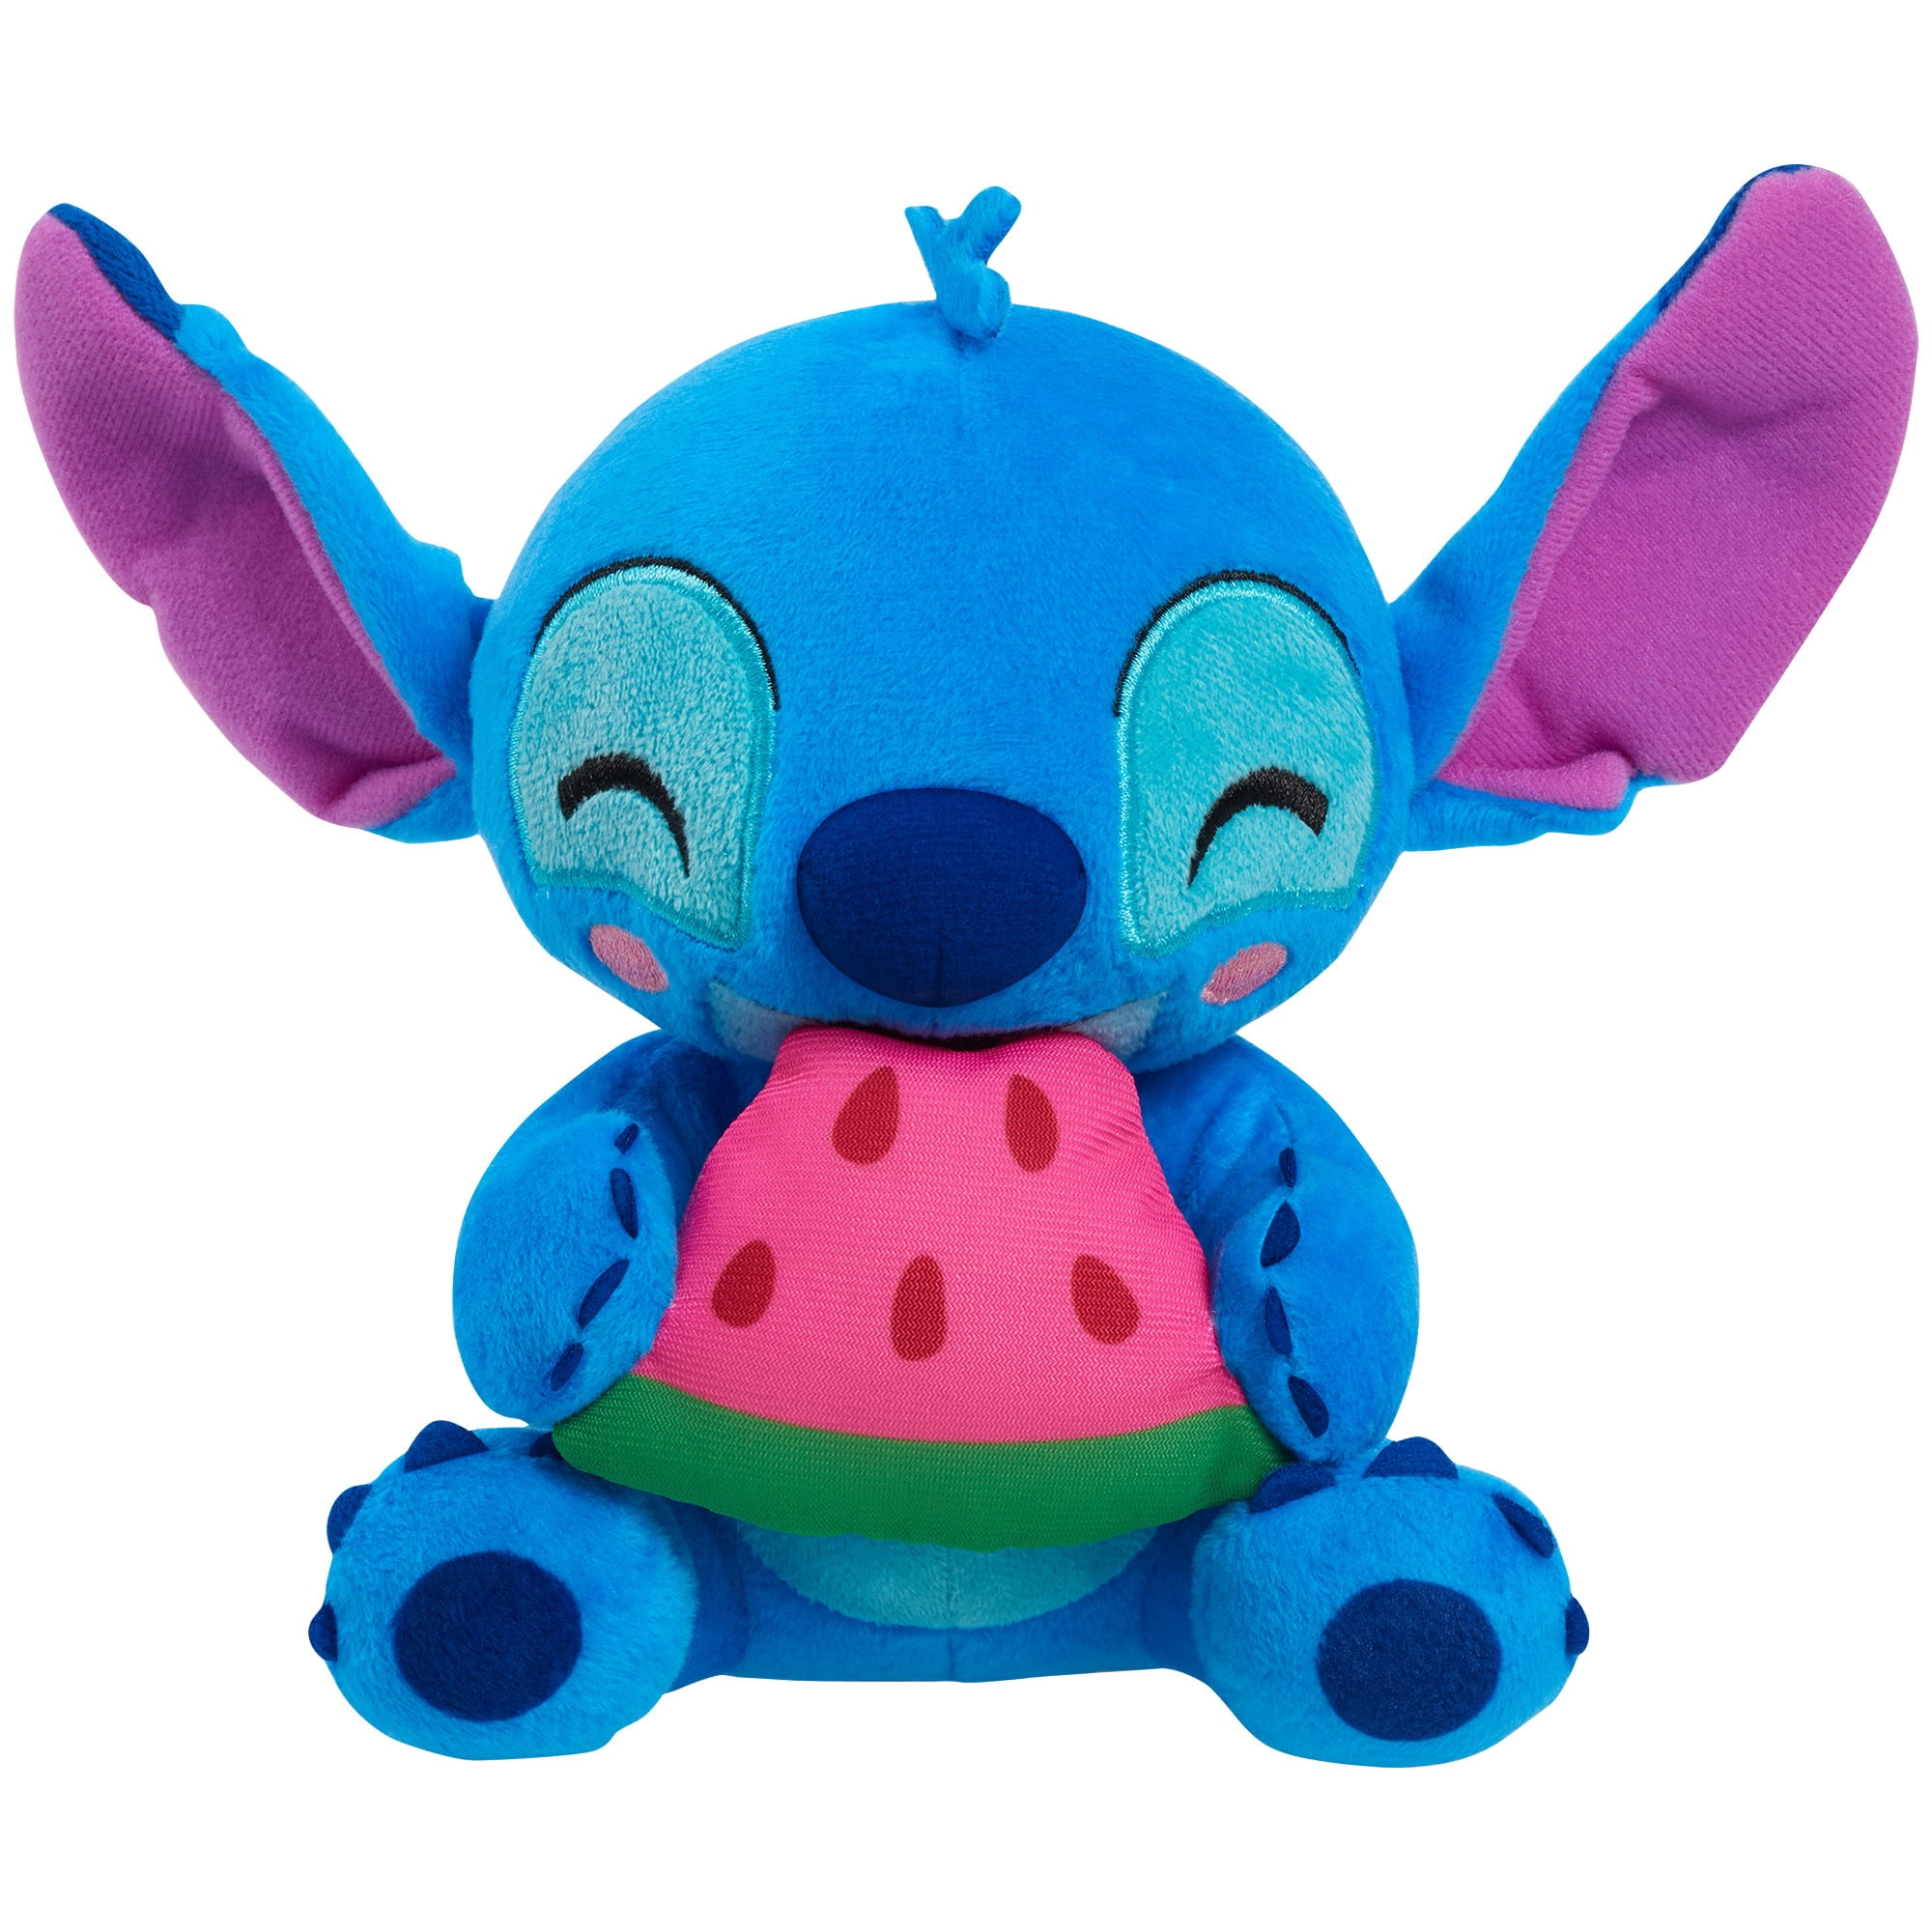  Disney Classics 23-inch Jumbo Plush with Lil Friend, Stuffed  Animal, Alien, Officially Licensed Kids Toys for Ages 2 Up,   Exclusive : Toys & Games